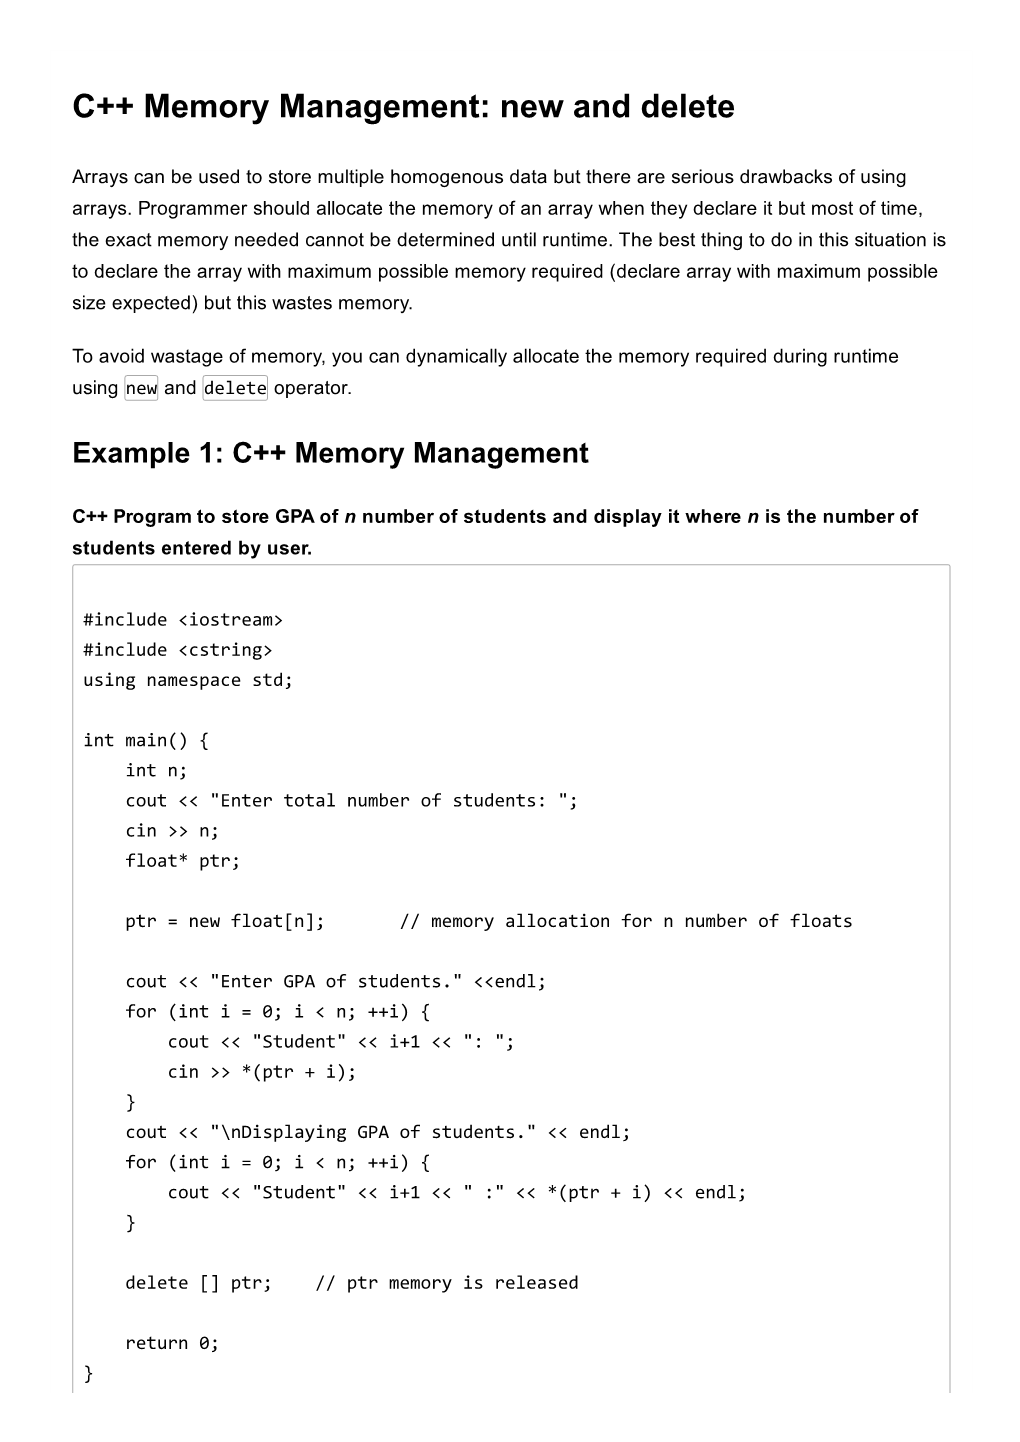 C++ Memory Management: New and Delete